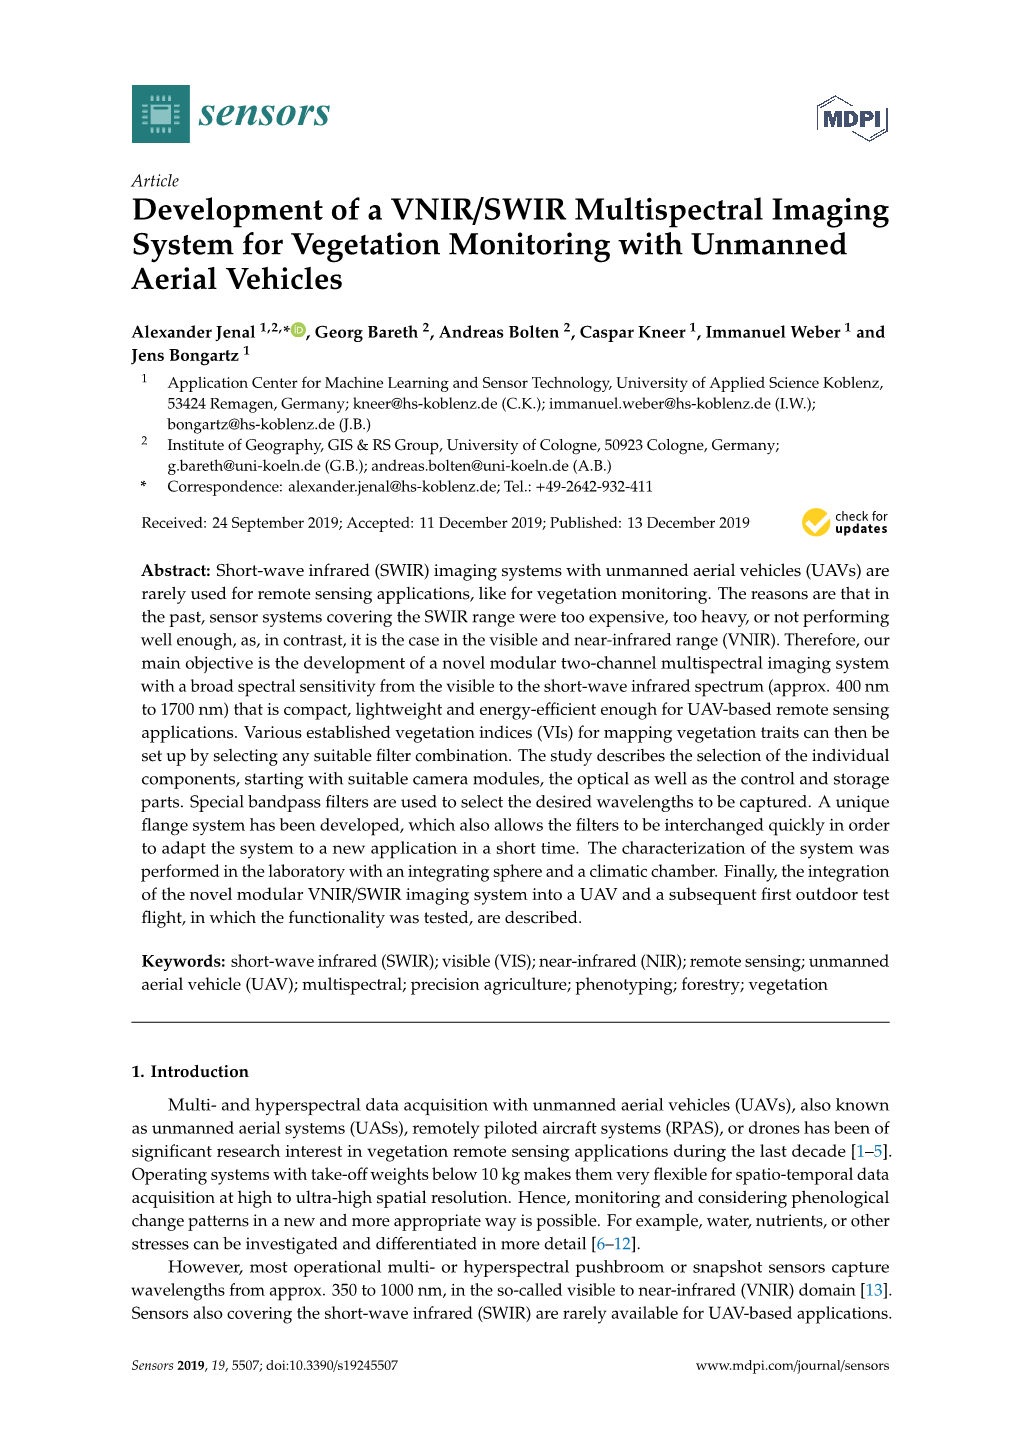 Development of a VNIR/SWIR Multispectral Imaging System for Vegetation Monitoring with Unmanned Aerial Vehicles